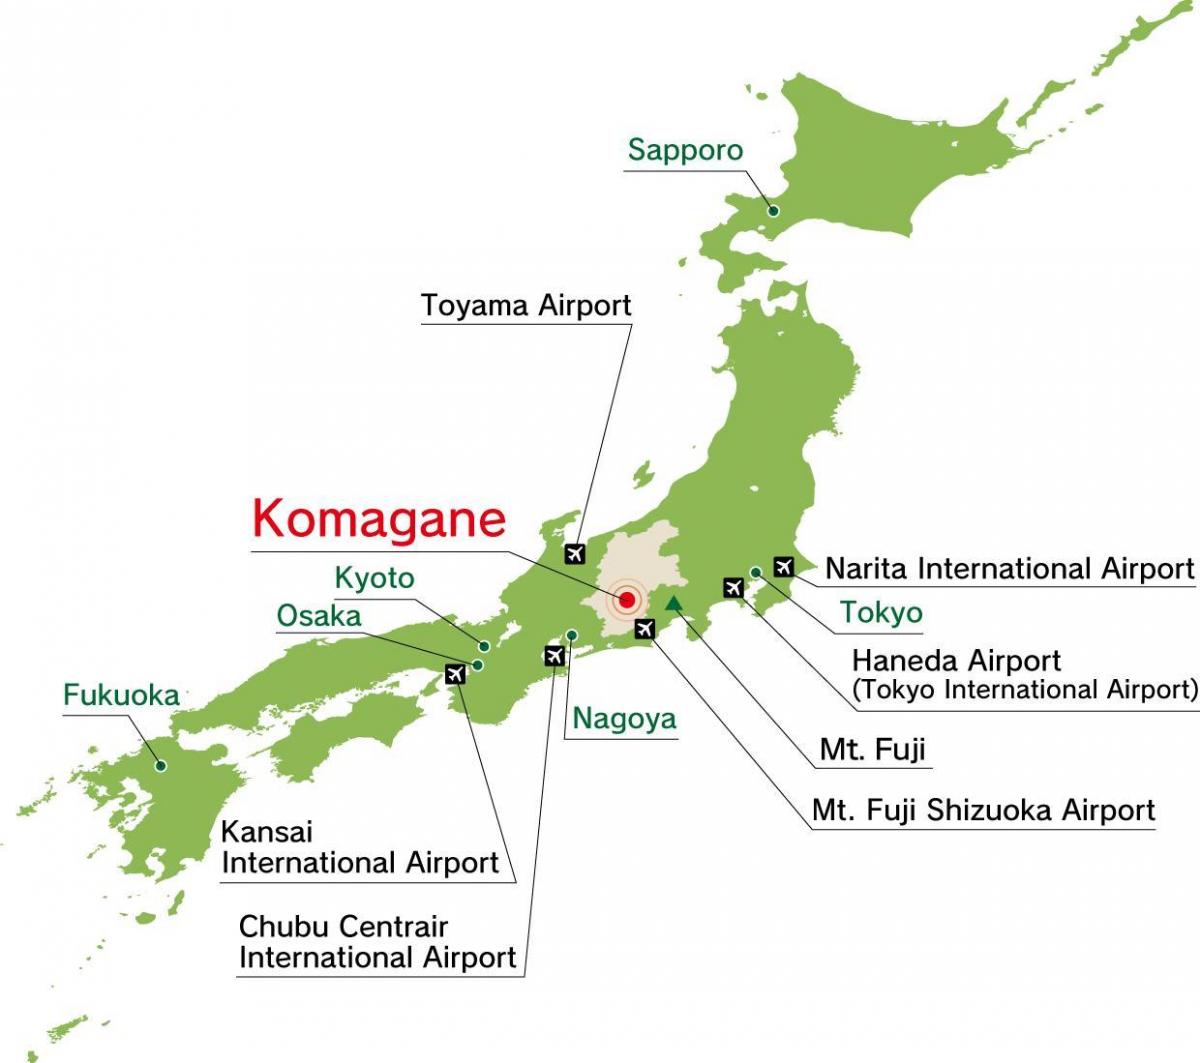 Map of Japan airports